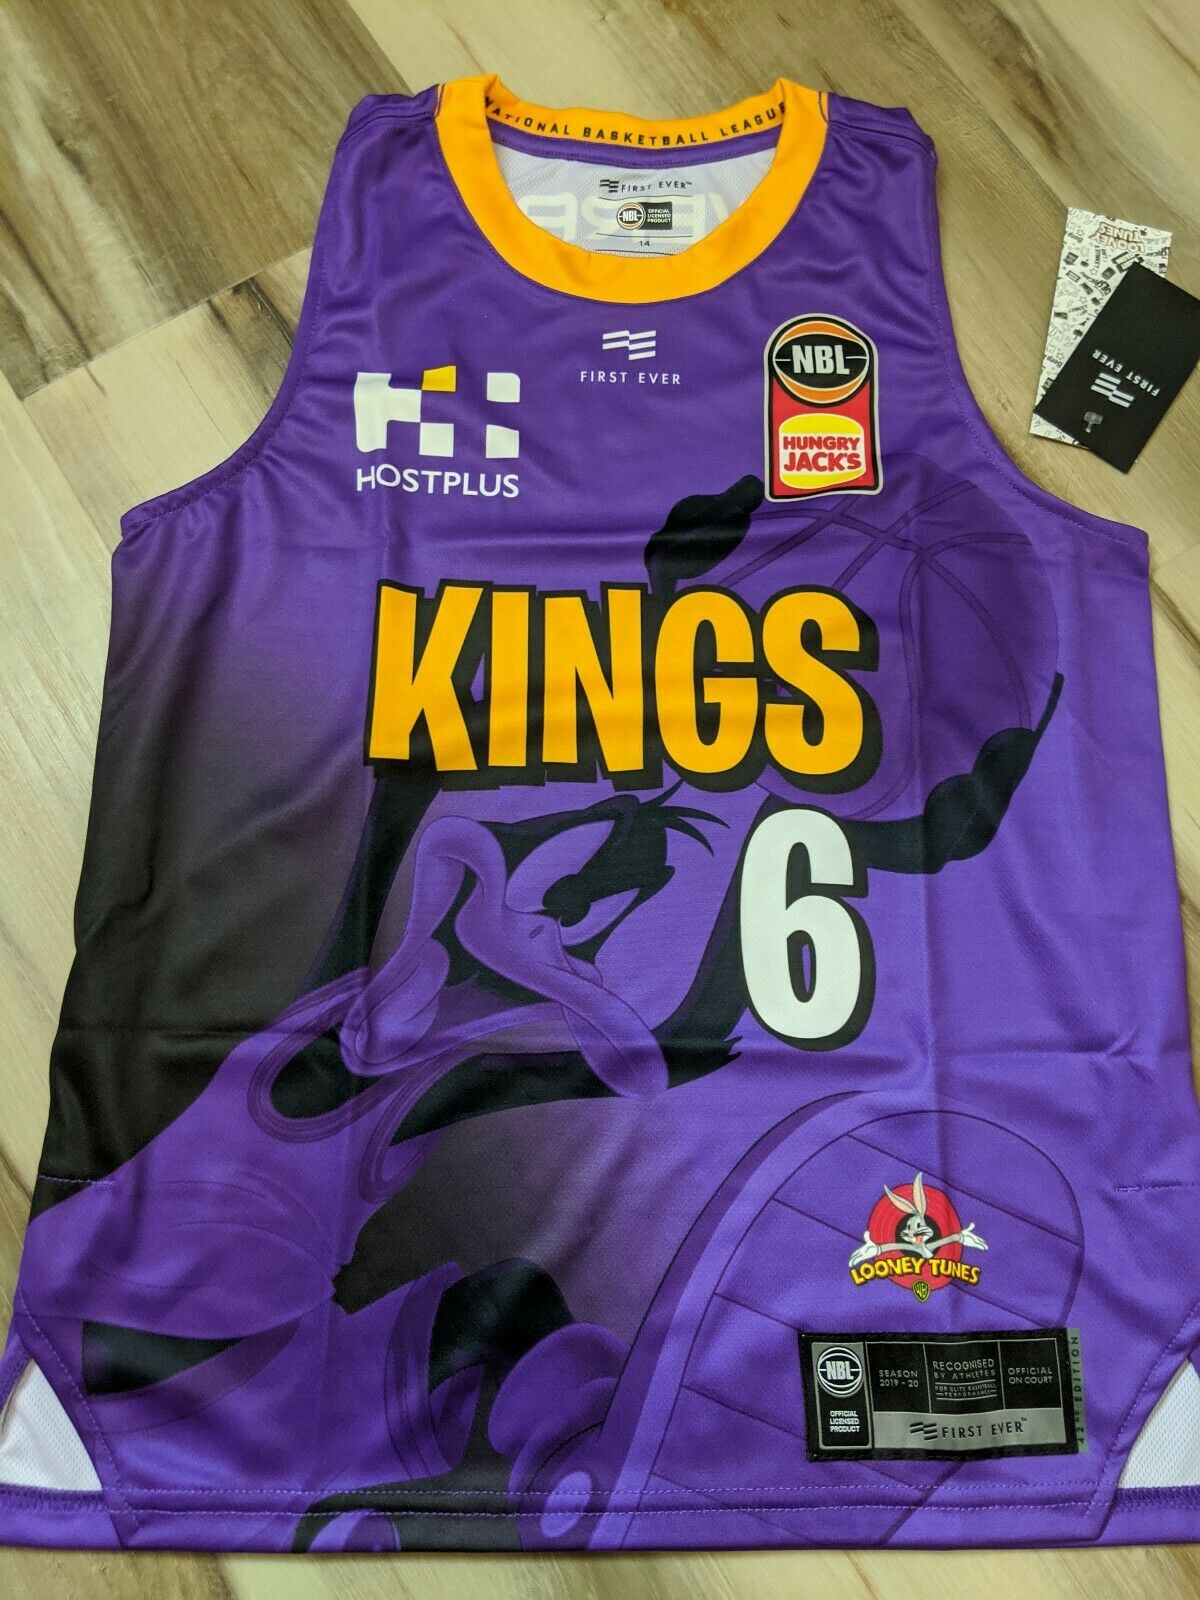 Best and worst of the NBL's Looney Tunes jersey designs